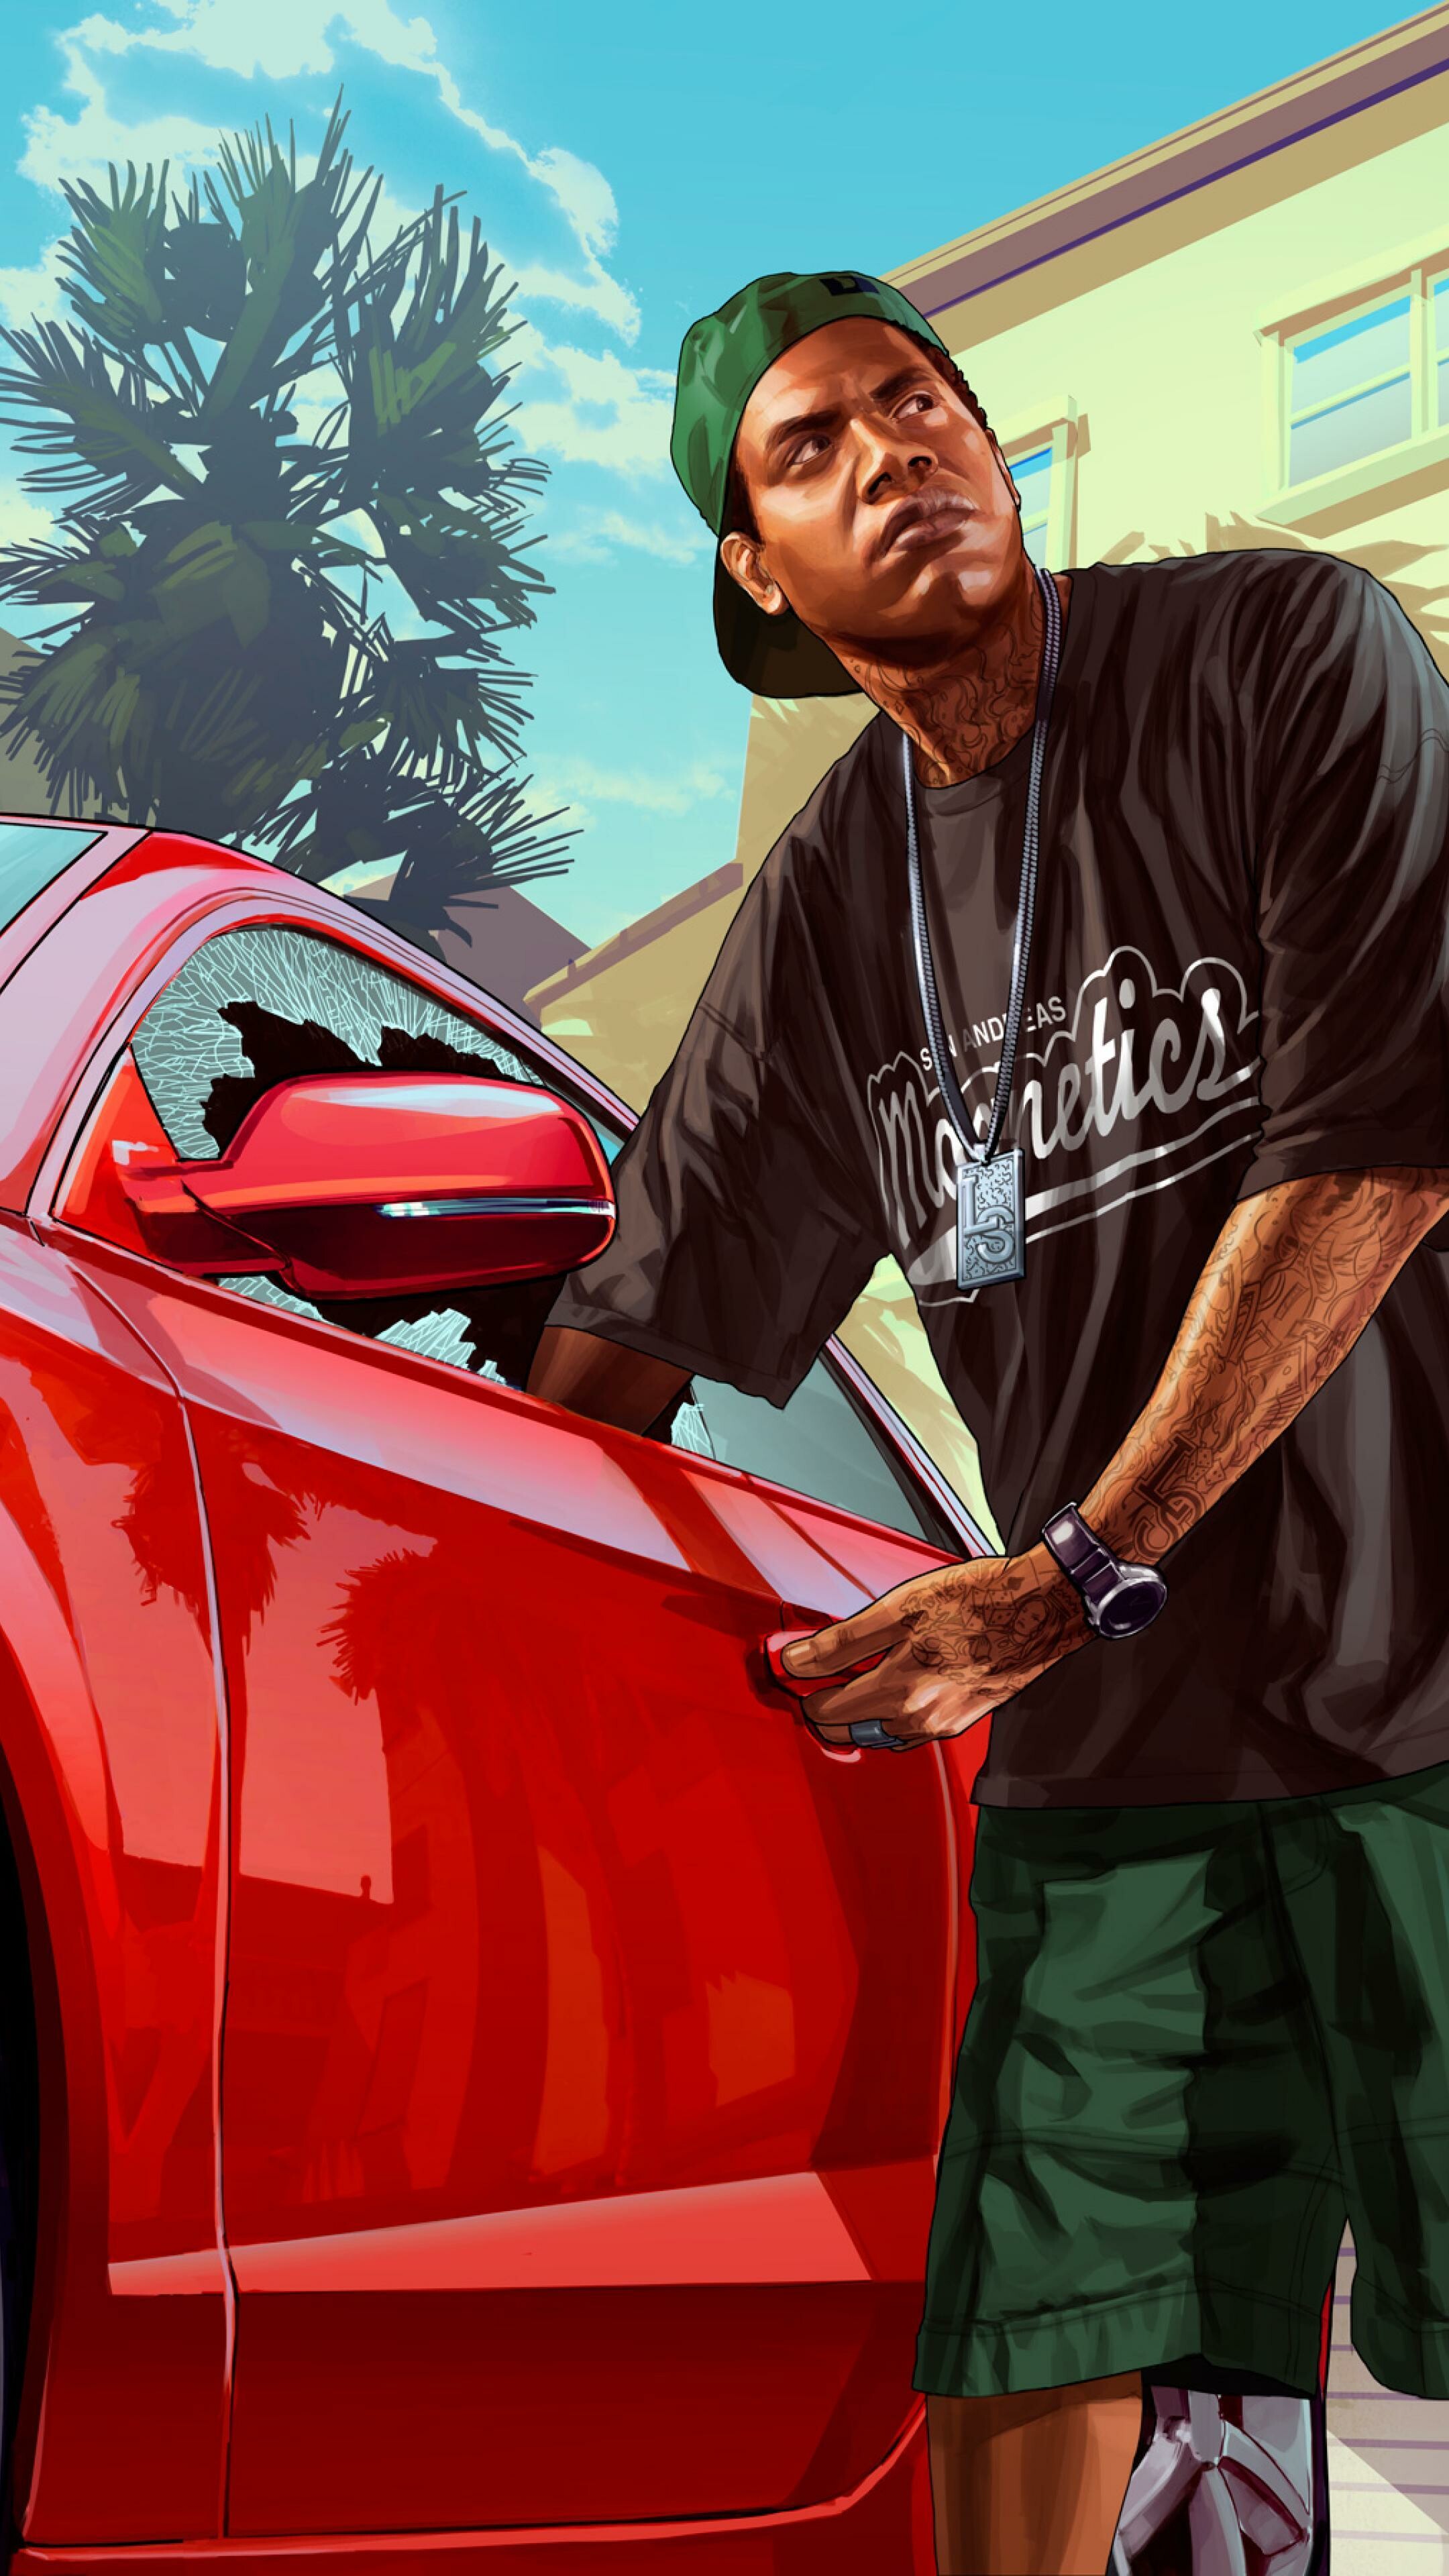 Grand Theft Auto 5: Lamar Davis, A character in the GTA series who appears as a central character and deuteragonist to Franklin Clinton. 2160x3840 4K Wallpaper.